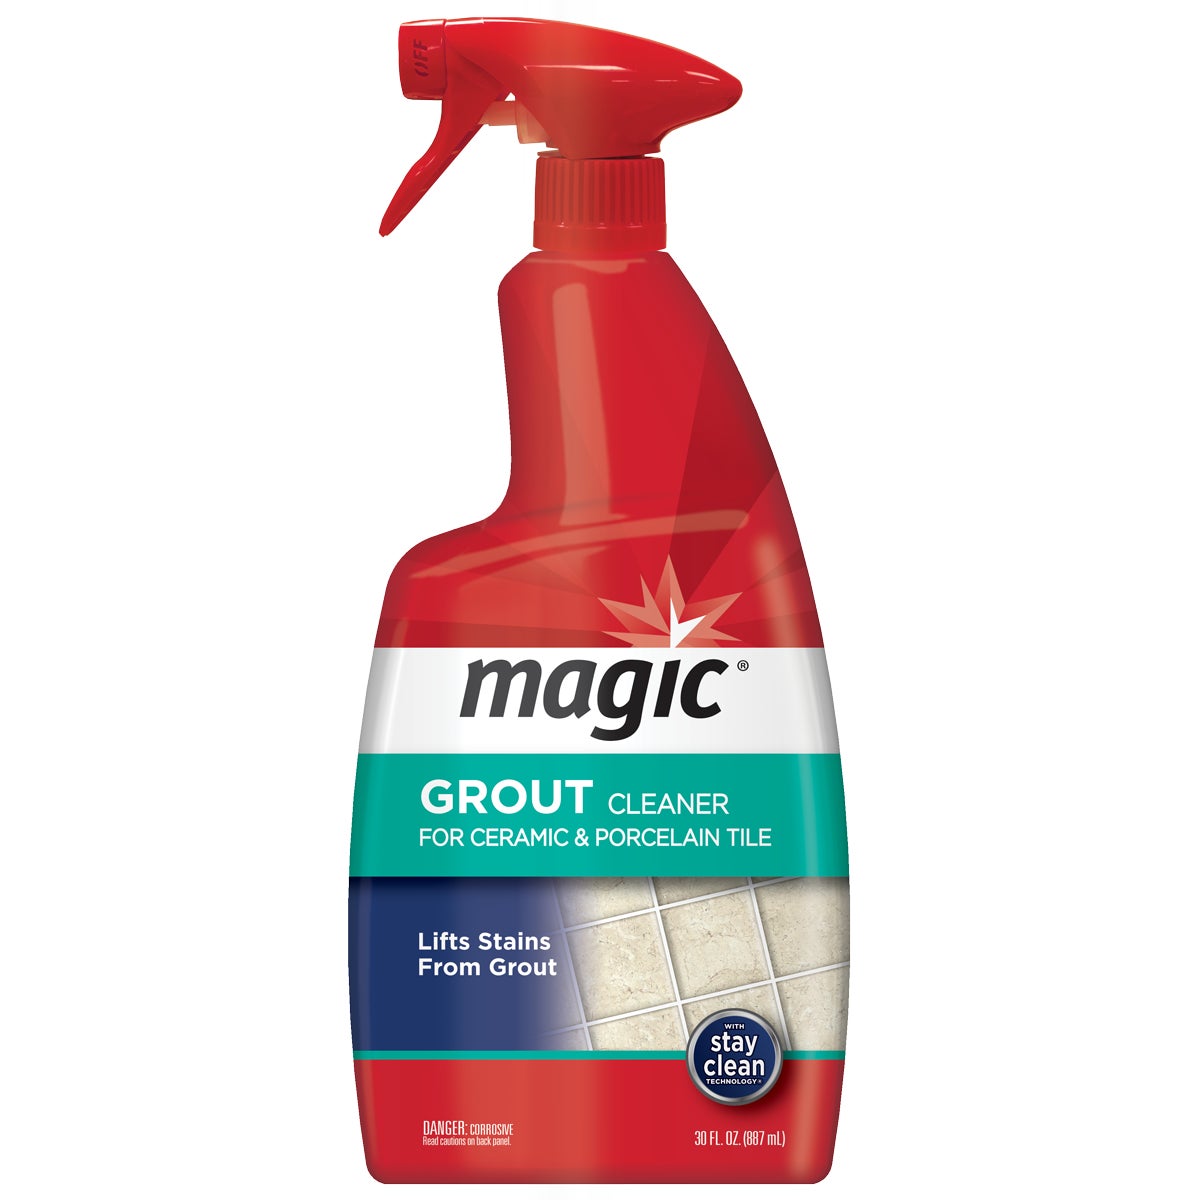 https://magicamerican.com/media/catalog/product/m/a/magic-grout-cleaner_front-updated08.2019.png?width=1200&height=&canvas=1200,&optimize=low&bg-color=255,255,255&fit=bounds&format=jpeg